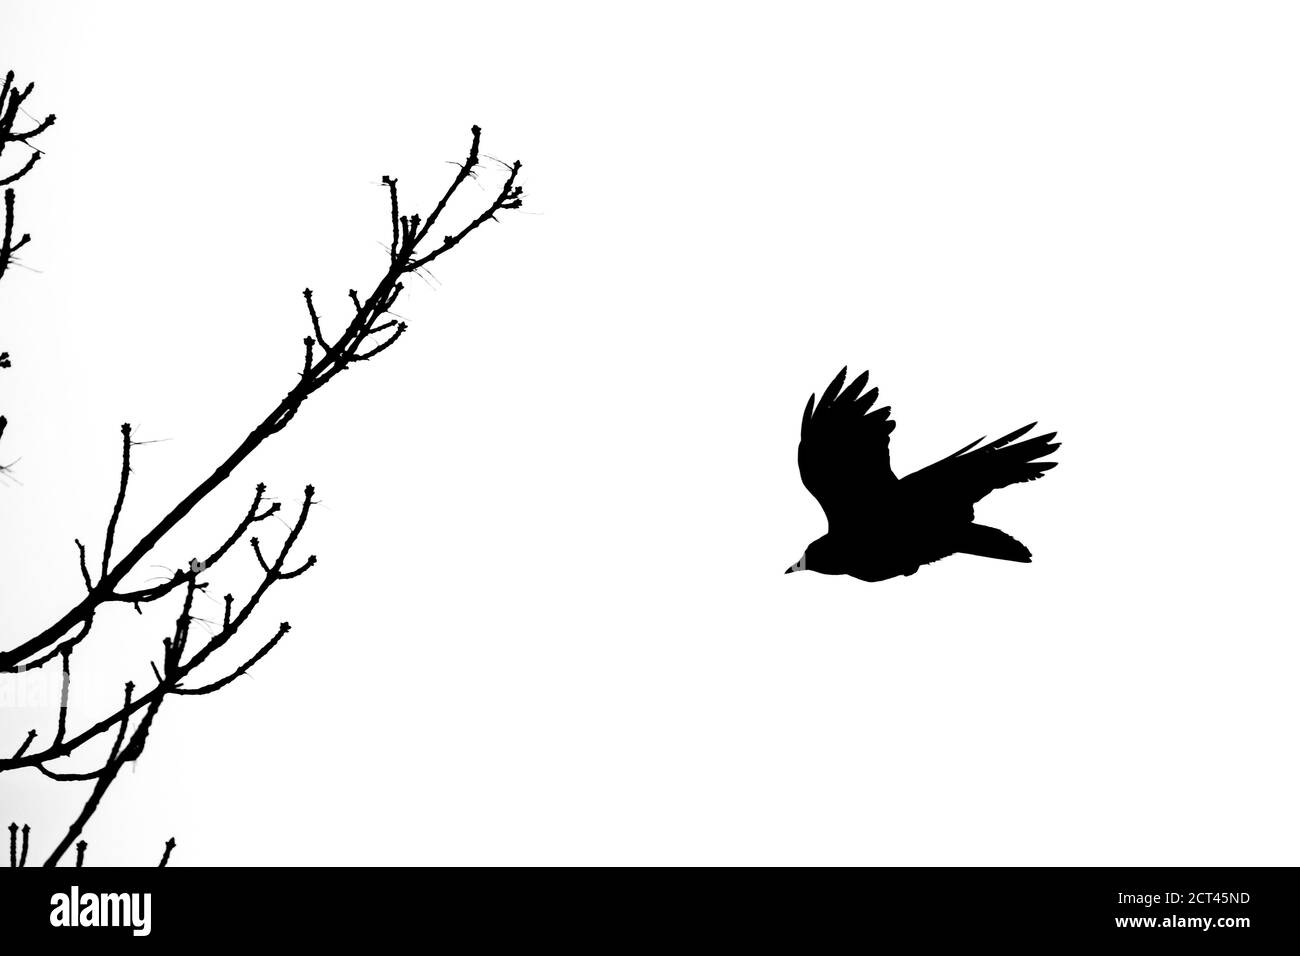 Flying crow and trees branches, black silhouette isolated on white background Stock Photo